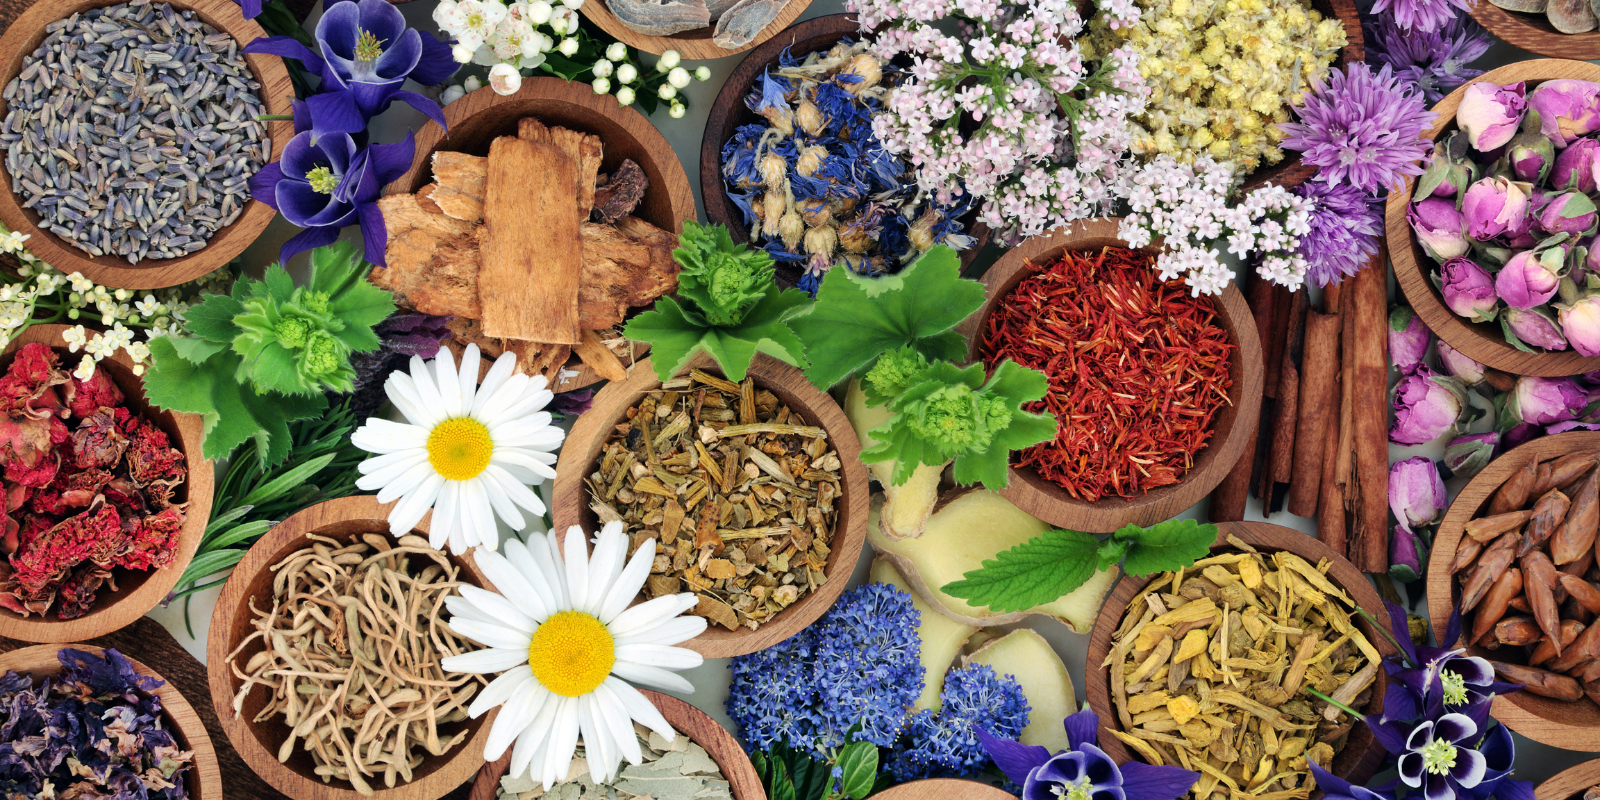 ayurvedic skincare ingredients time tested over 5000 years